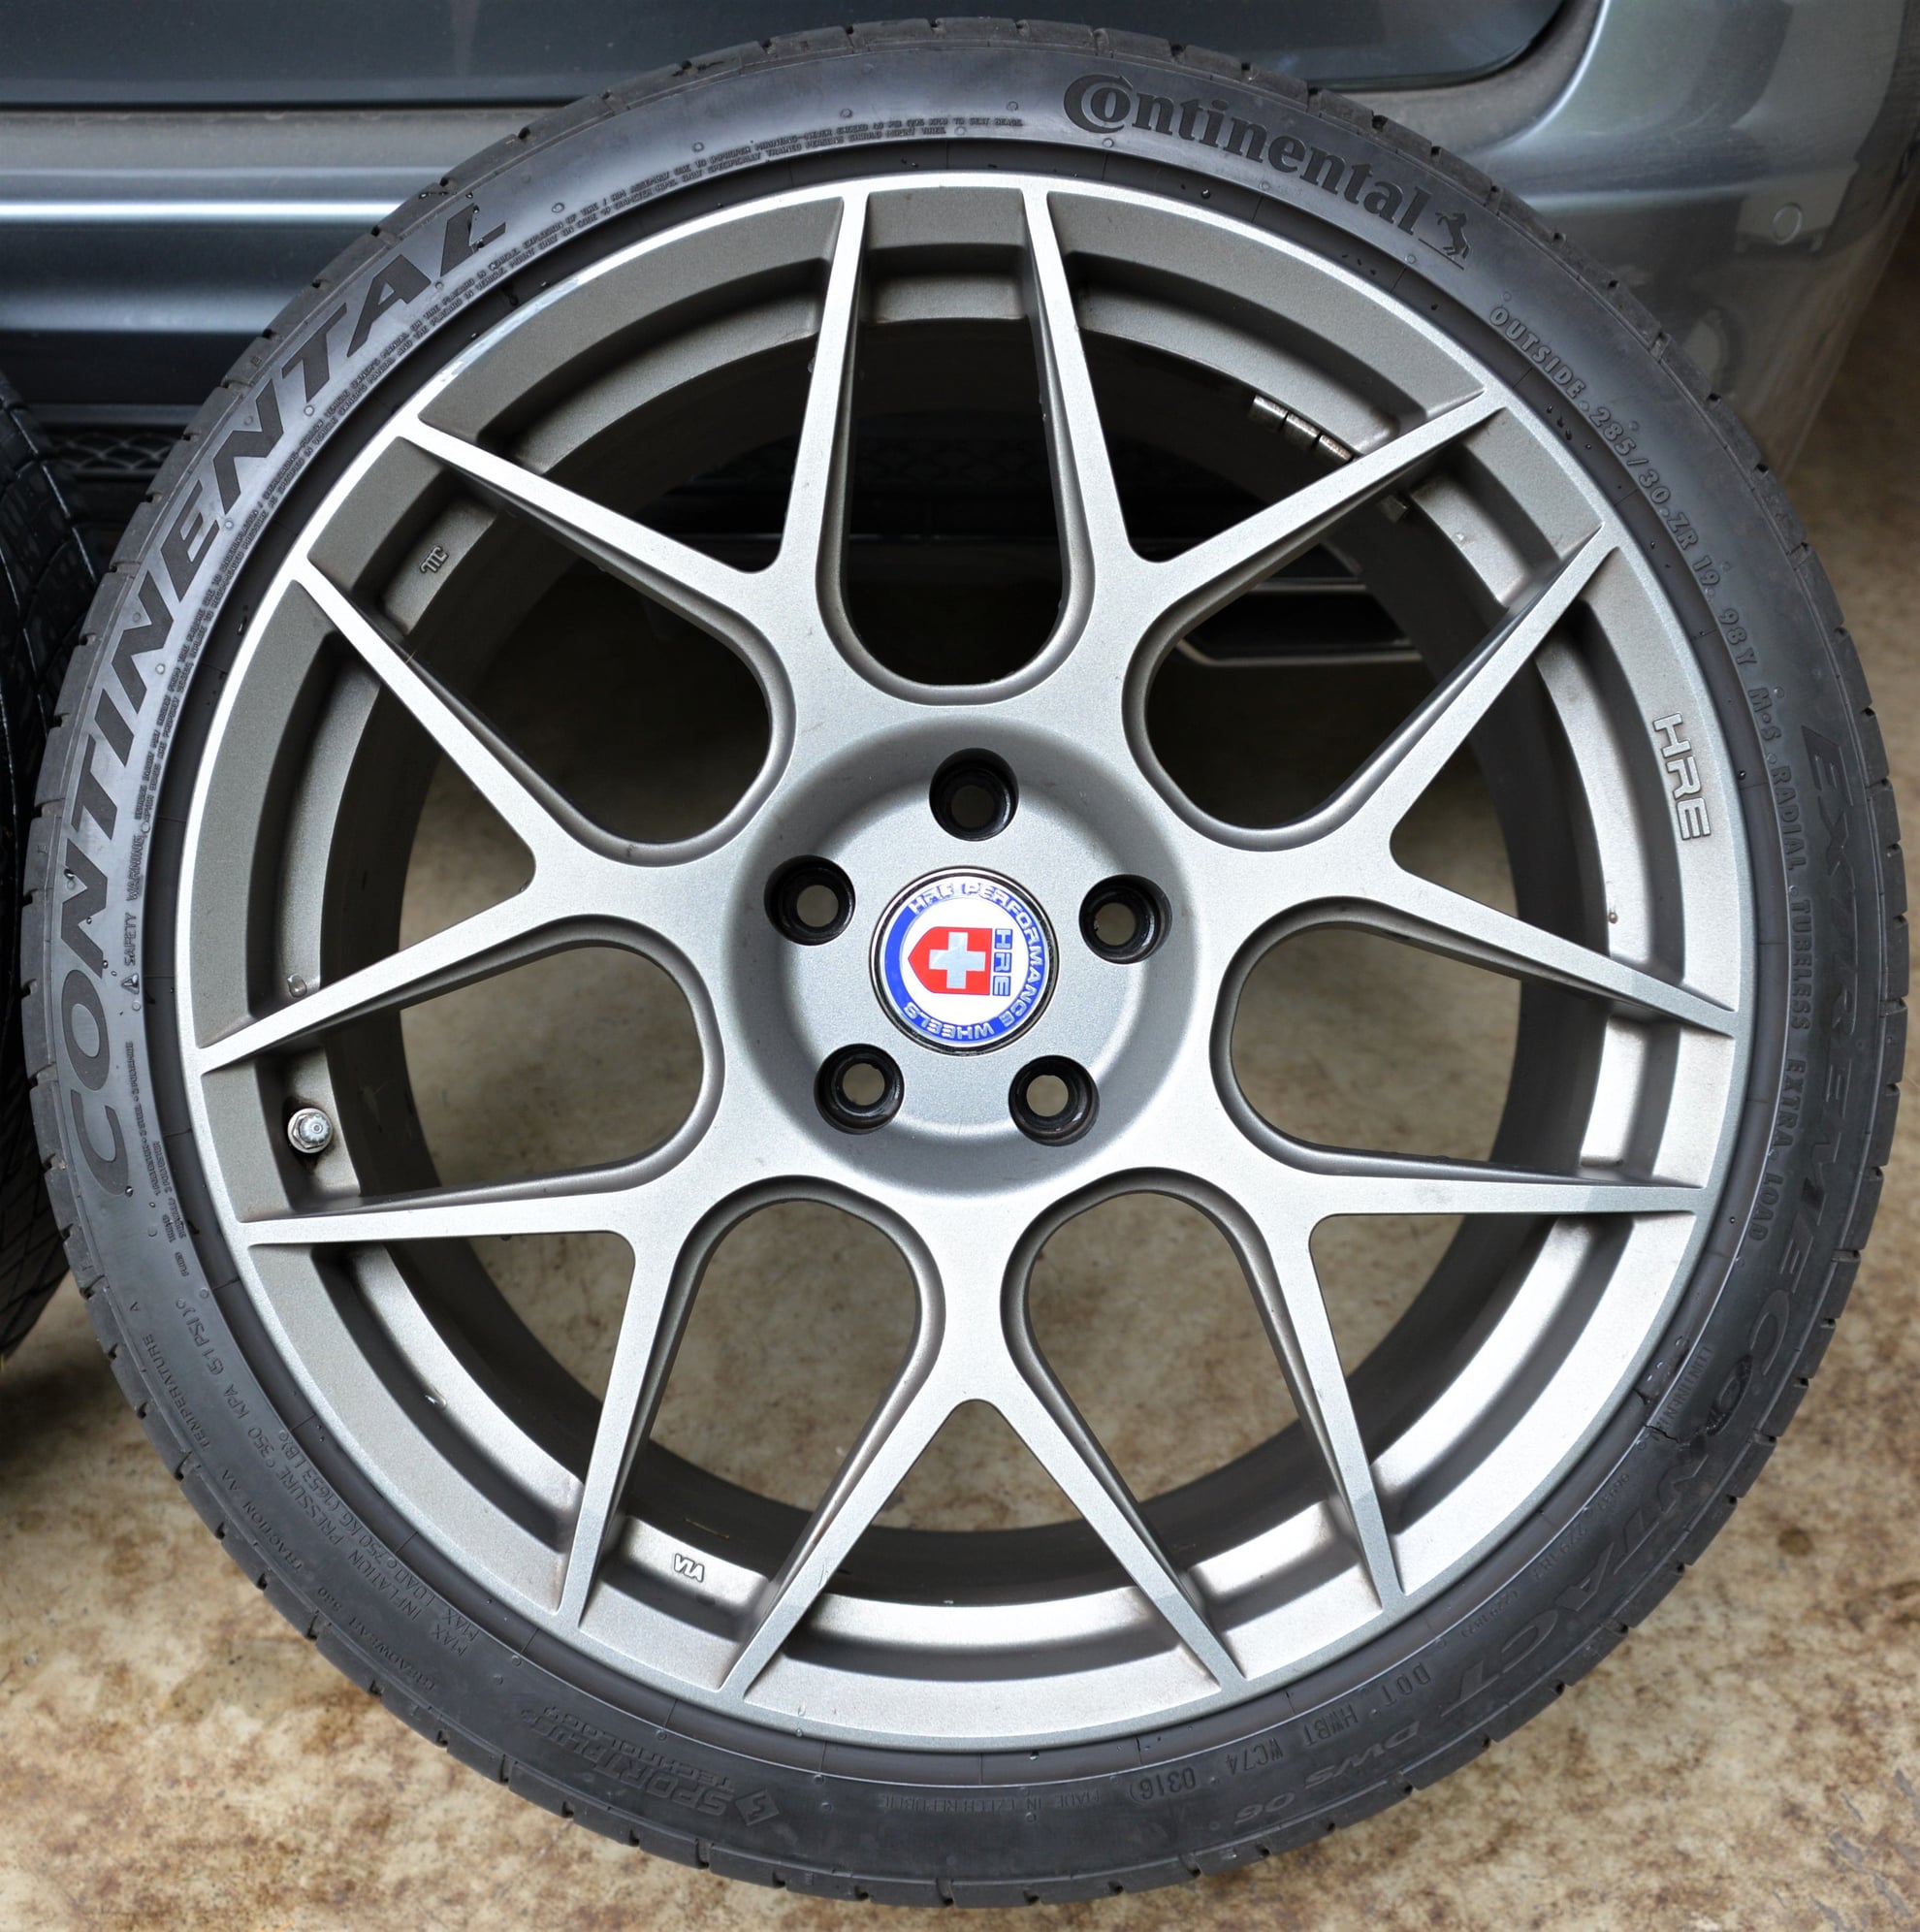 Wheels and Tires/Axles - 19" HRE Wheels and Tires for Mercedes/AMG - $1500 - Used - All Years Mercedes-Benz E63 AMG S - Sherwood, OR 97140, United States